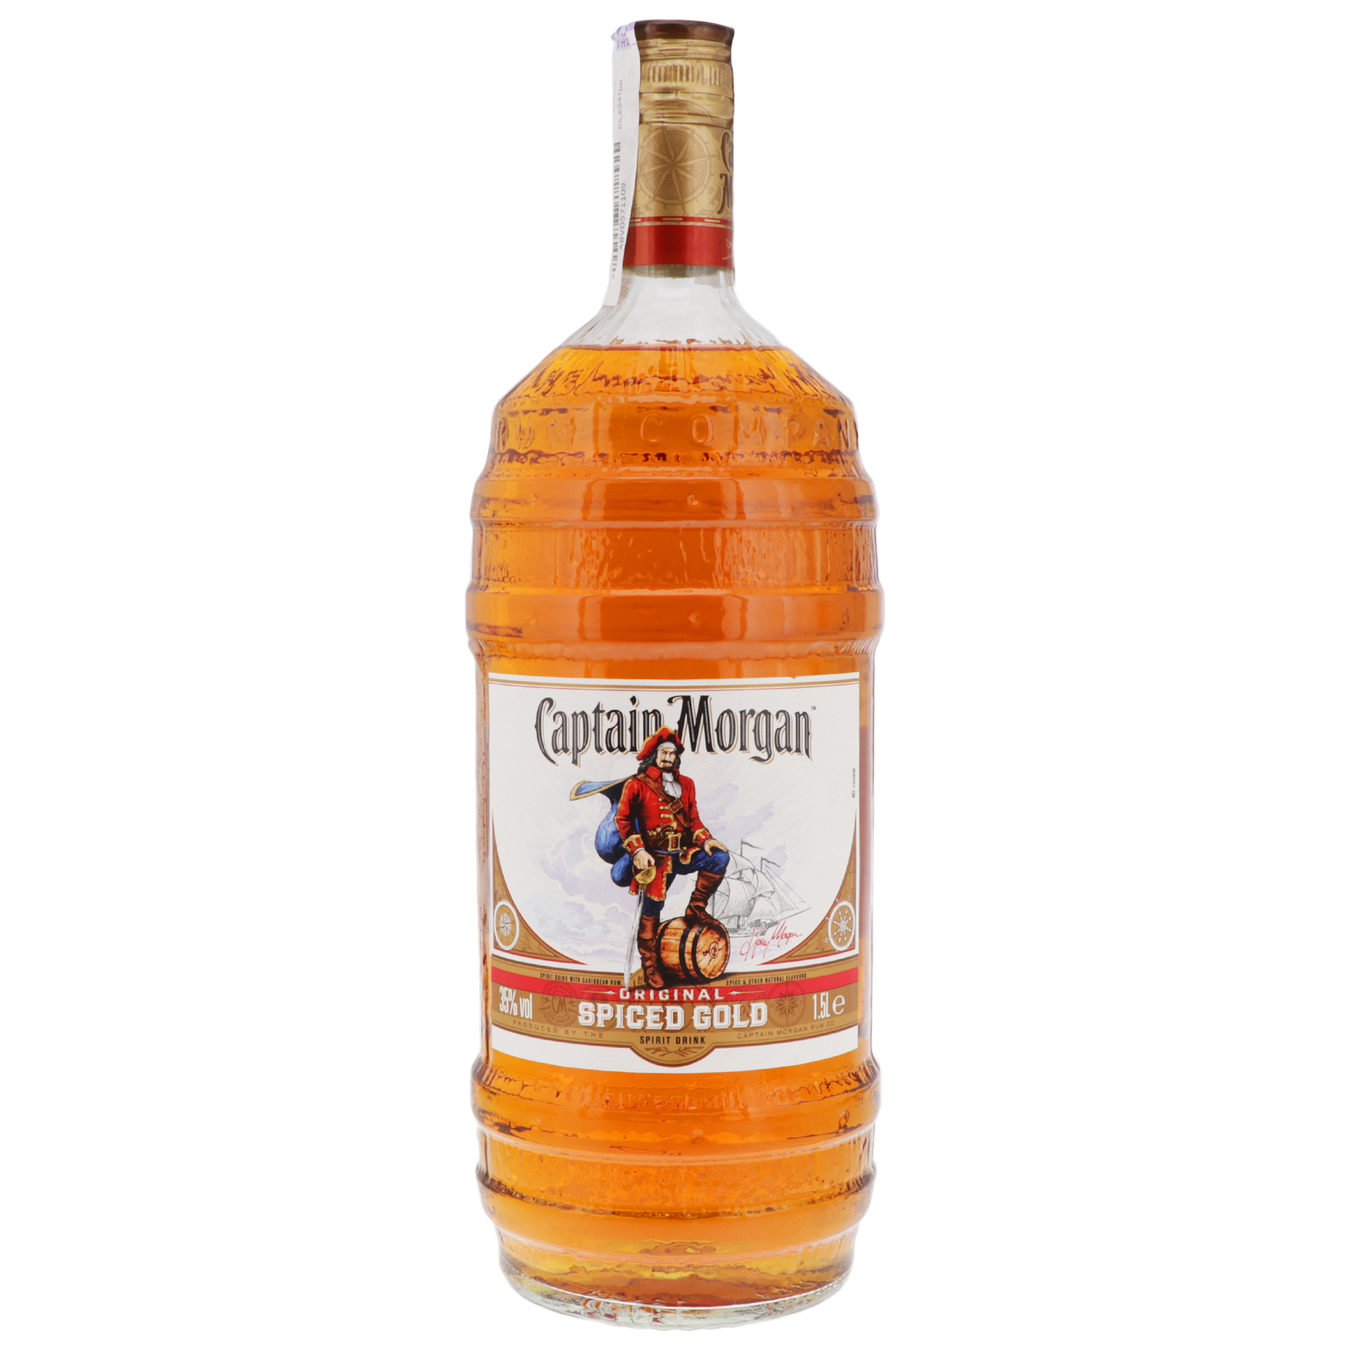 Capitan Morgan Spiced Gold Alcoholic beverage based on Caribbean rum 35% 1,5l